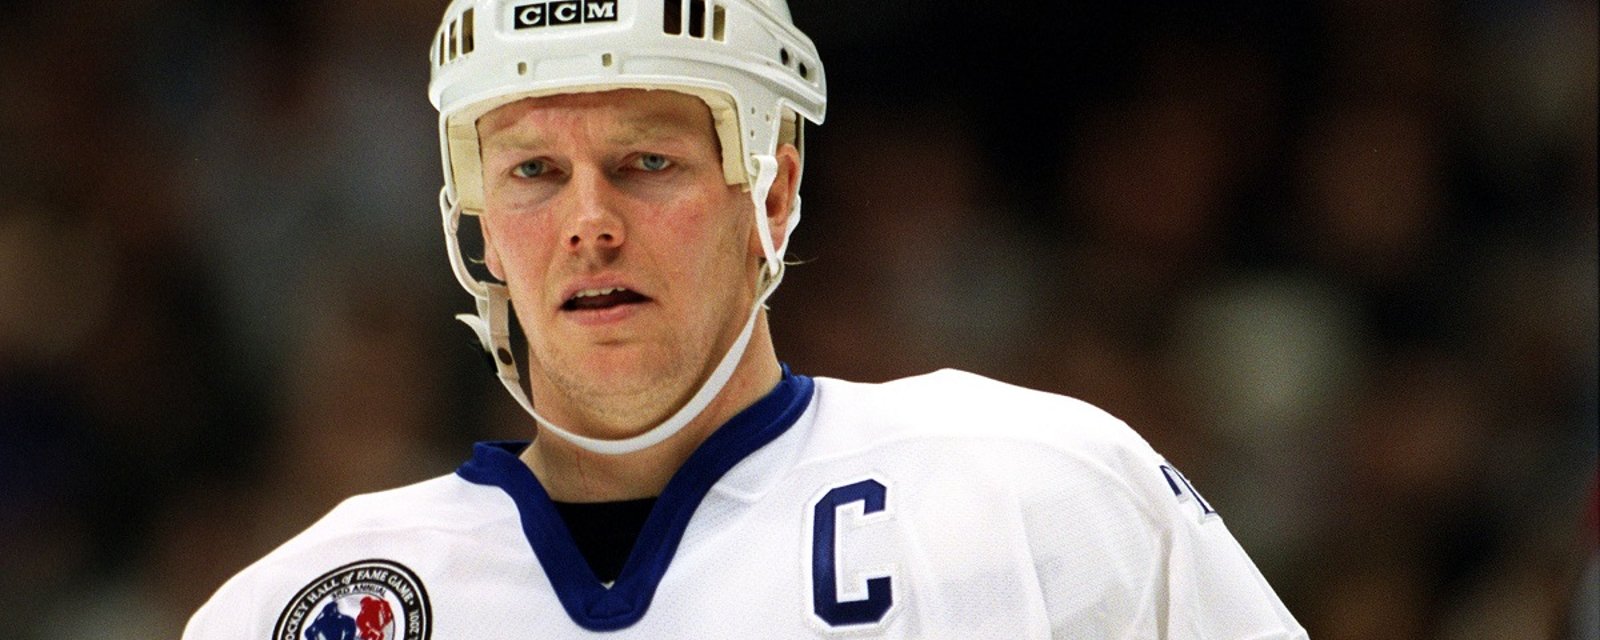 Former Leafs captain Sundin names his pick for the team's next captain.